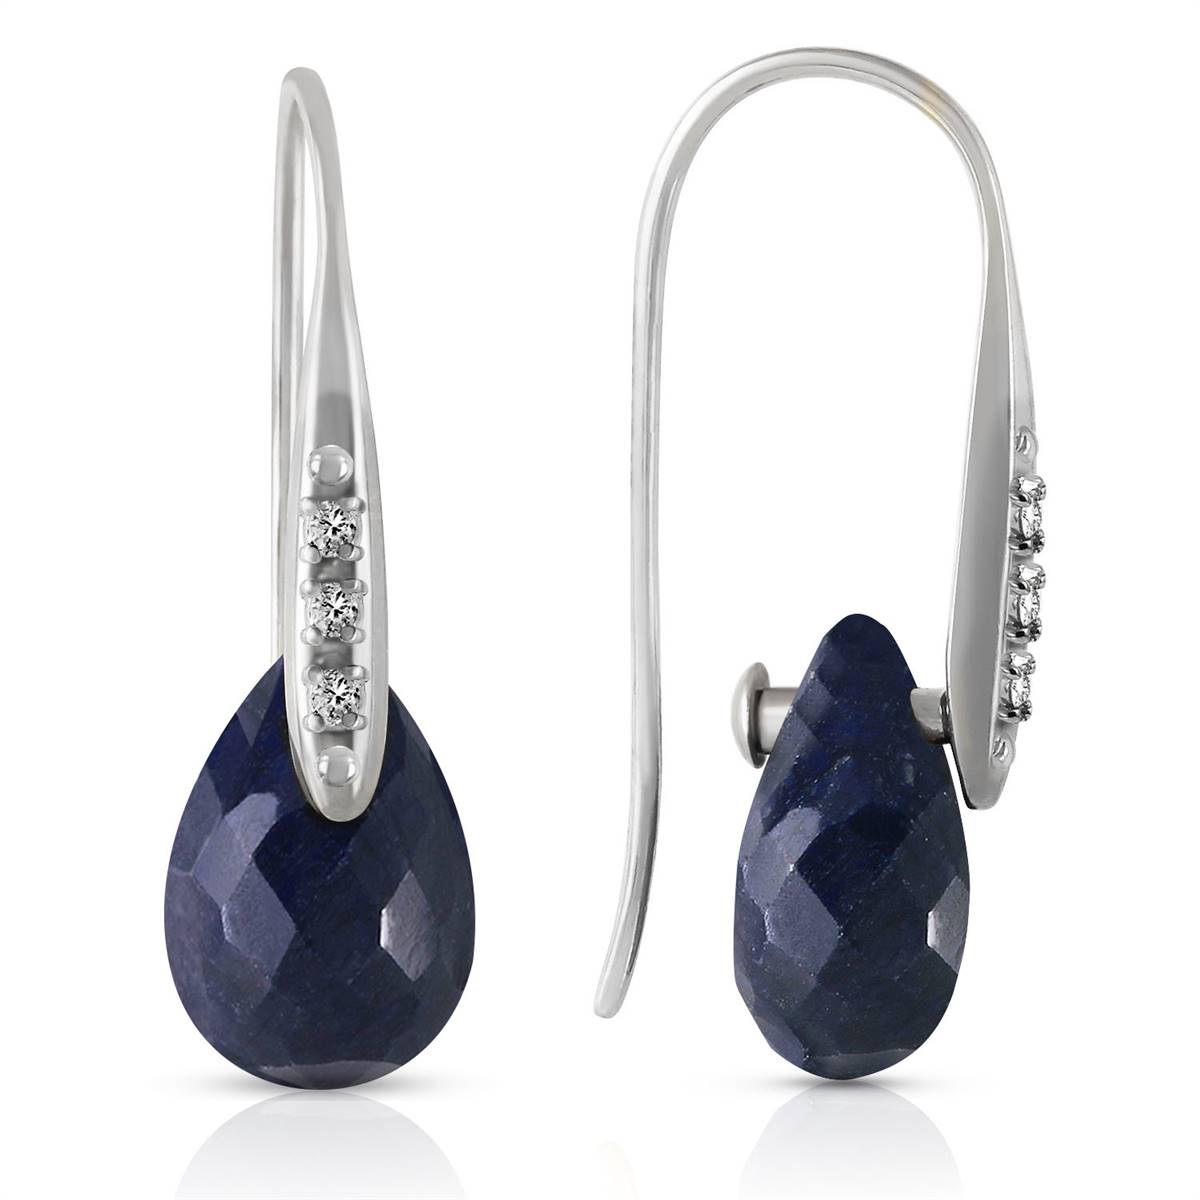 14K Solid White Gold Fish Hook Earrings w/ Diamonds & Dangling Dyed Sapphires